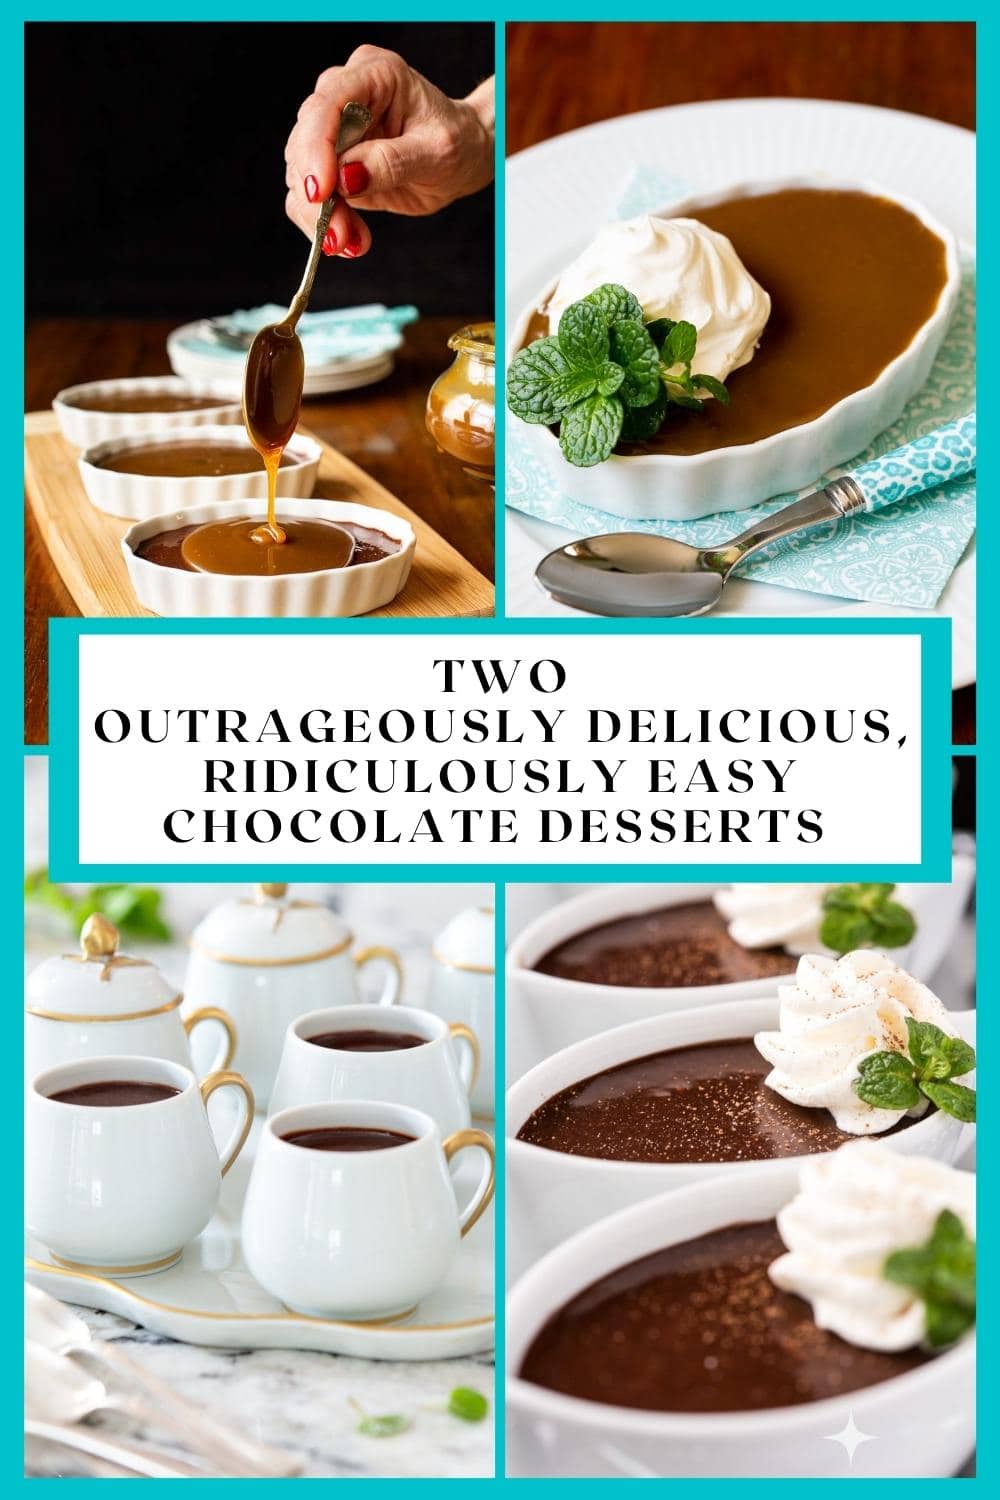 Two Outrageously Delicious, Ridiculously Easy Chocolate Desserts